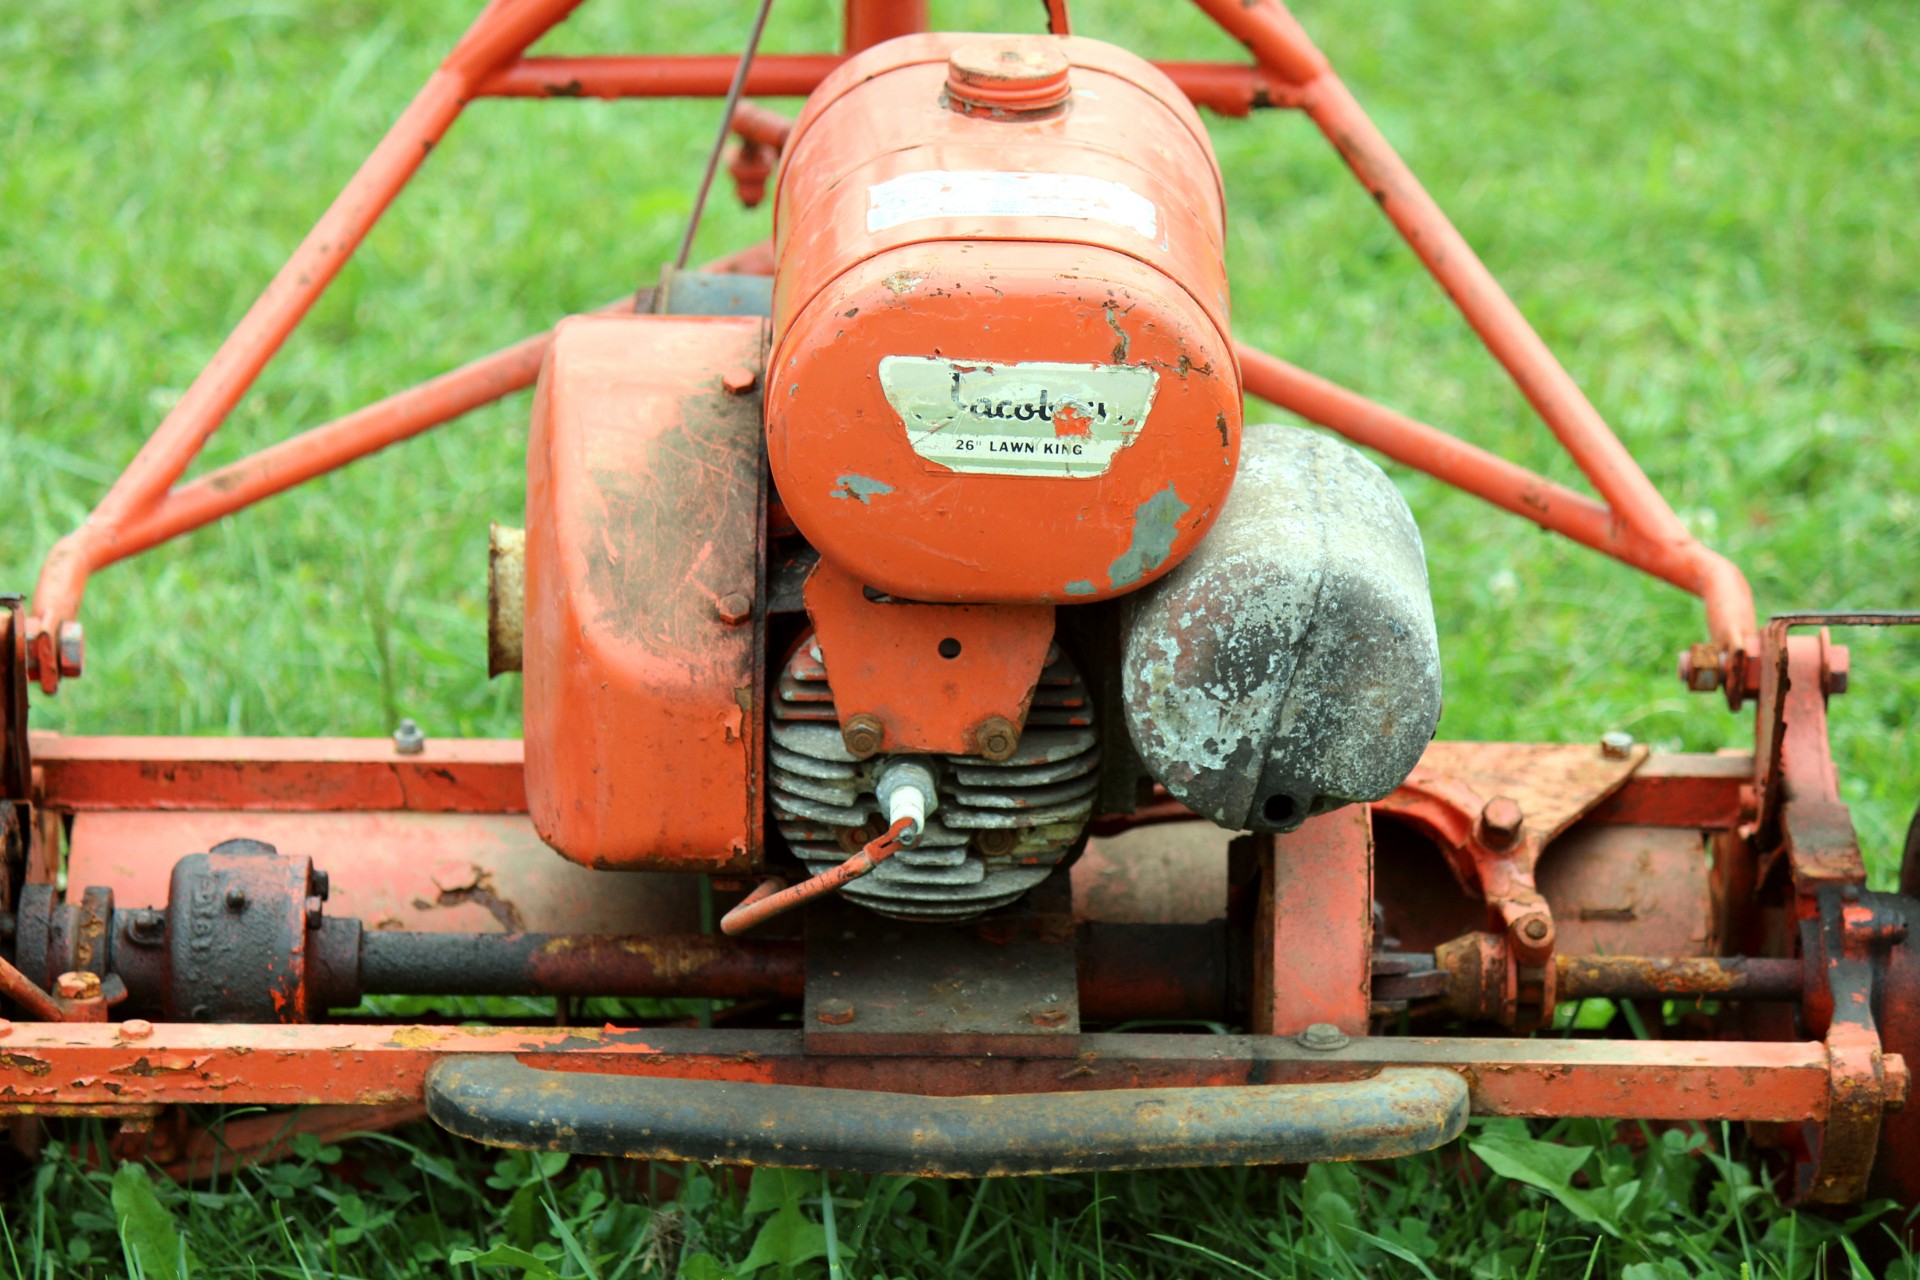 Lawnmower,mow,ancient,old,worn out - free image from